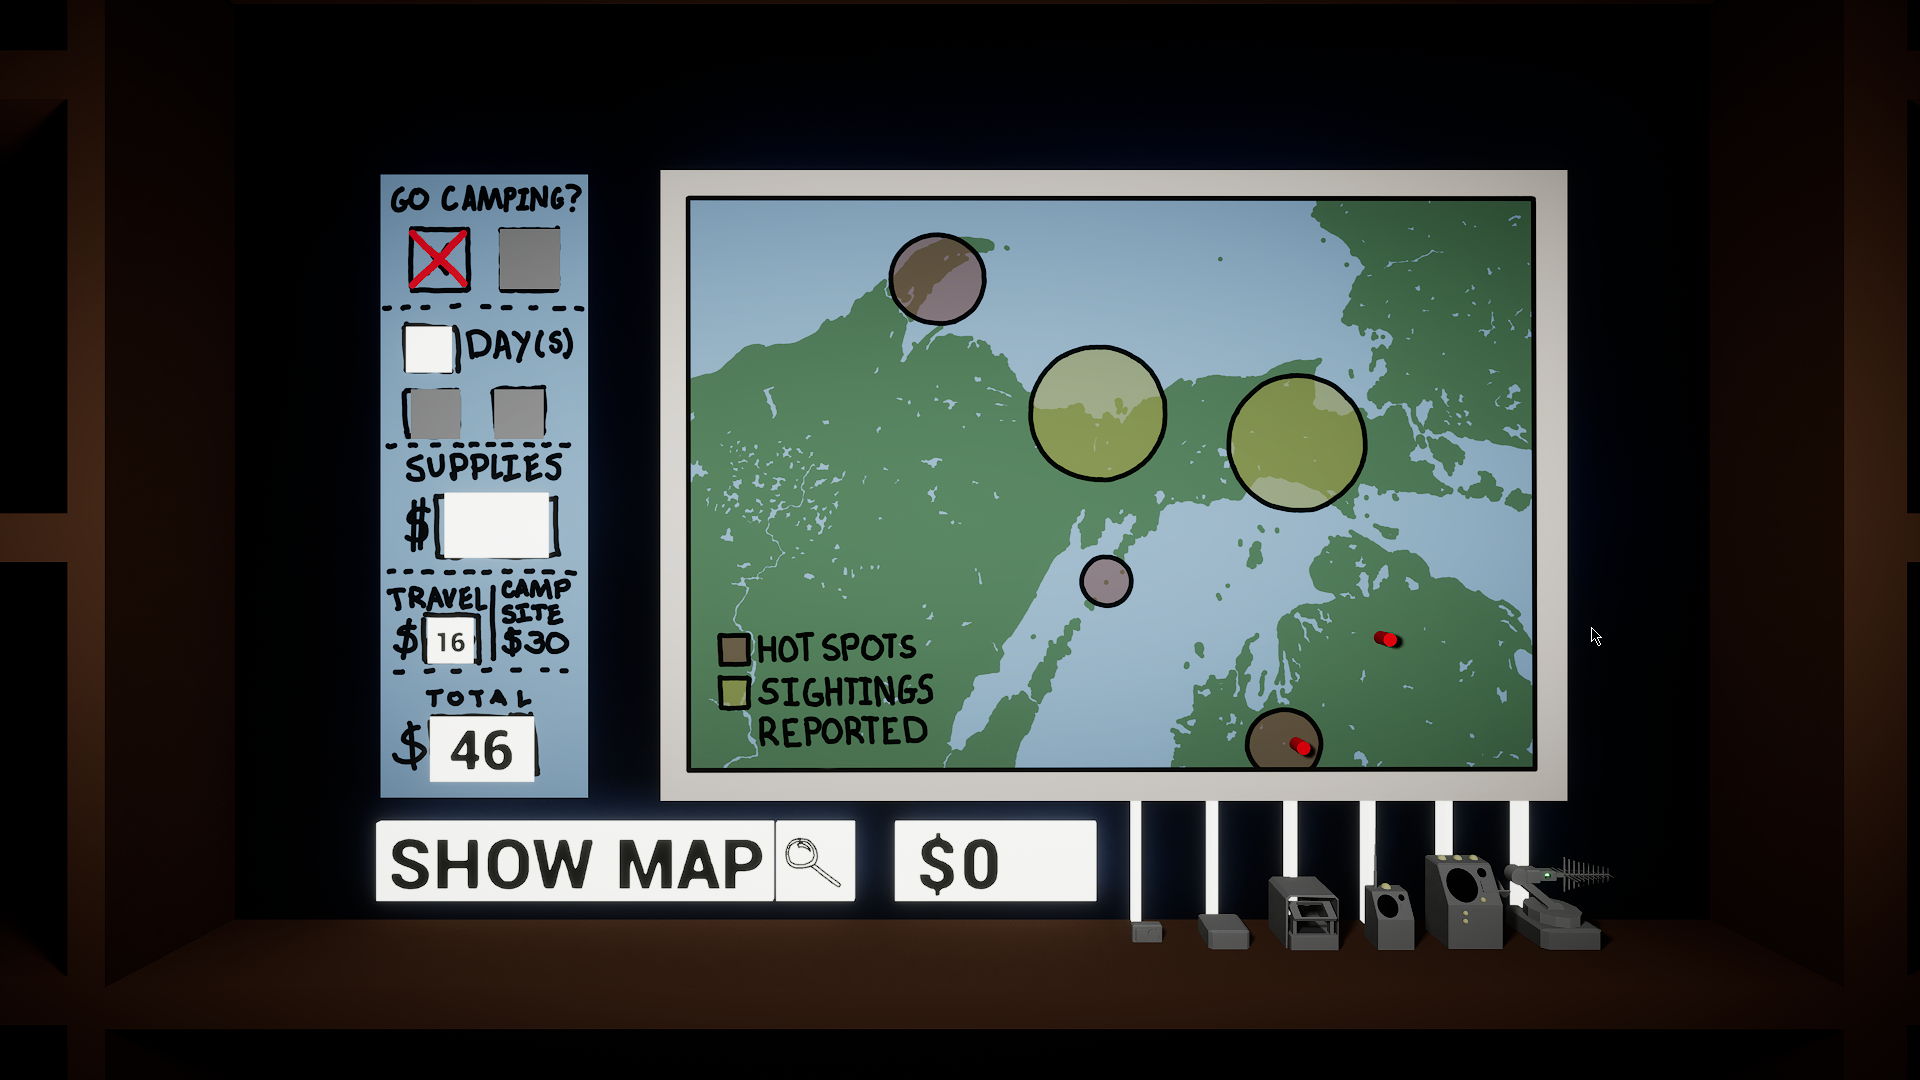 Camping menu screen showing a map of northern Michigan with a pin placed by the player, displaying travel distance cost information.